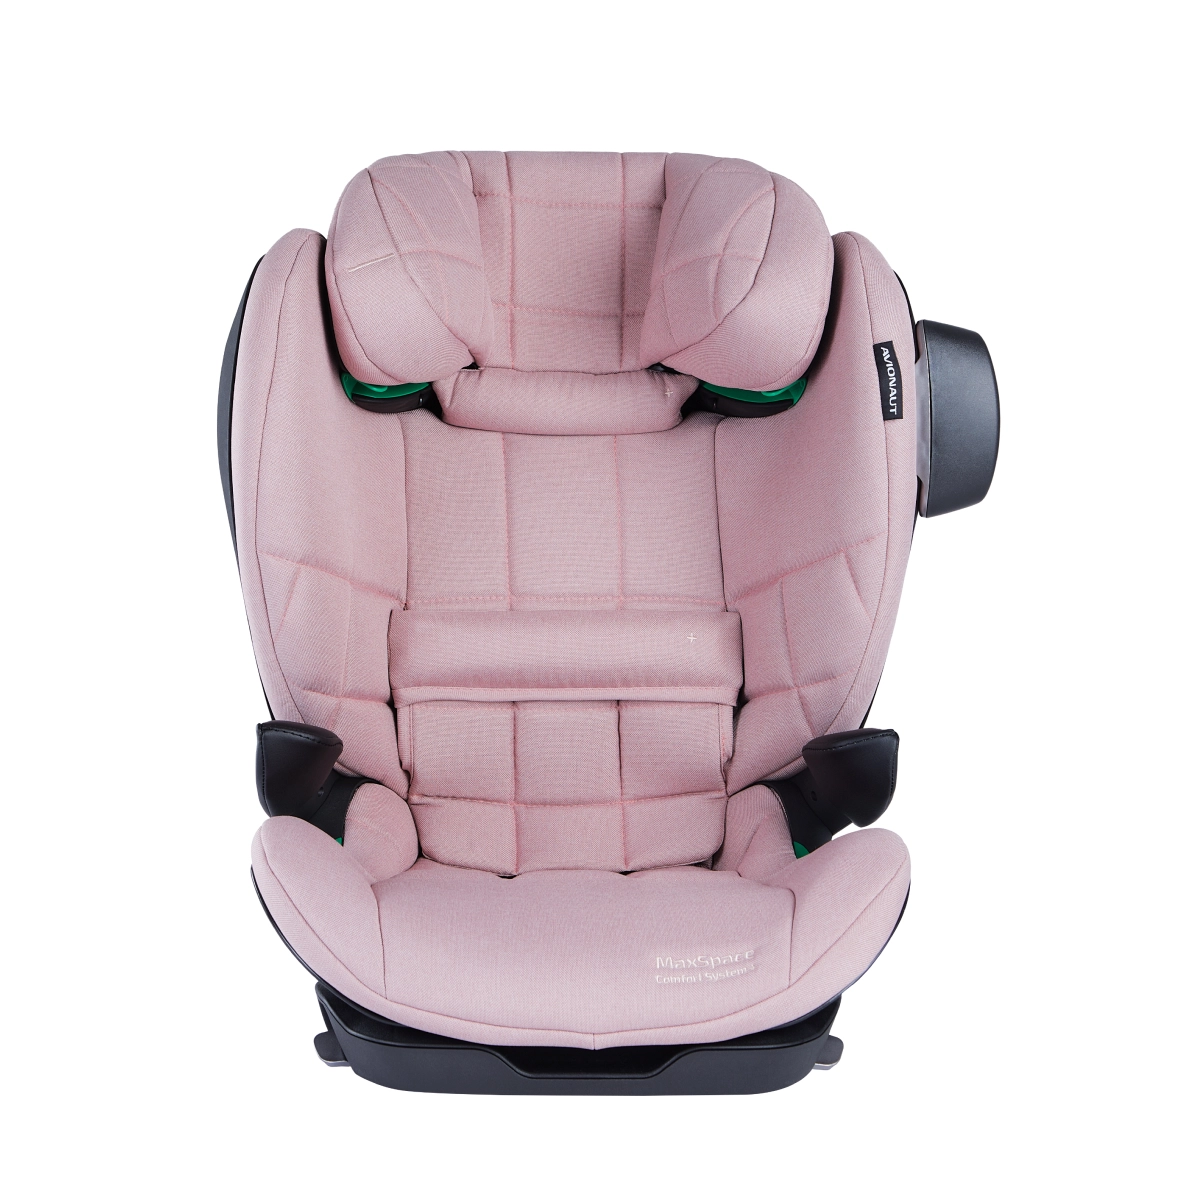 Avionaut MaxSpace Comfort System+ Group 2/3 Car Seat in Pink